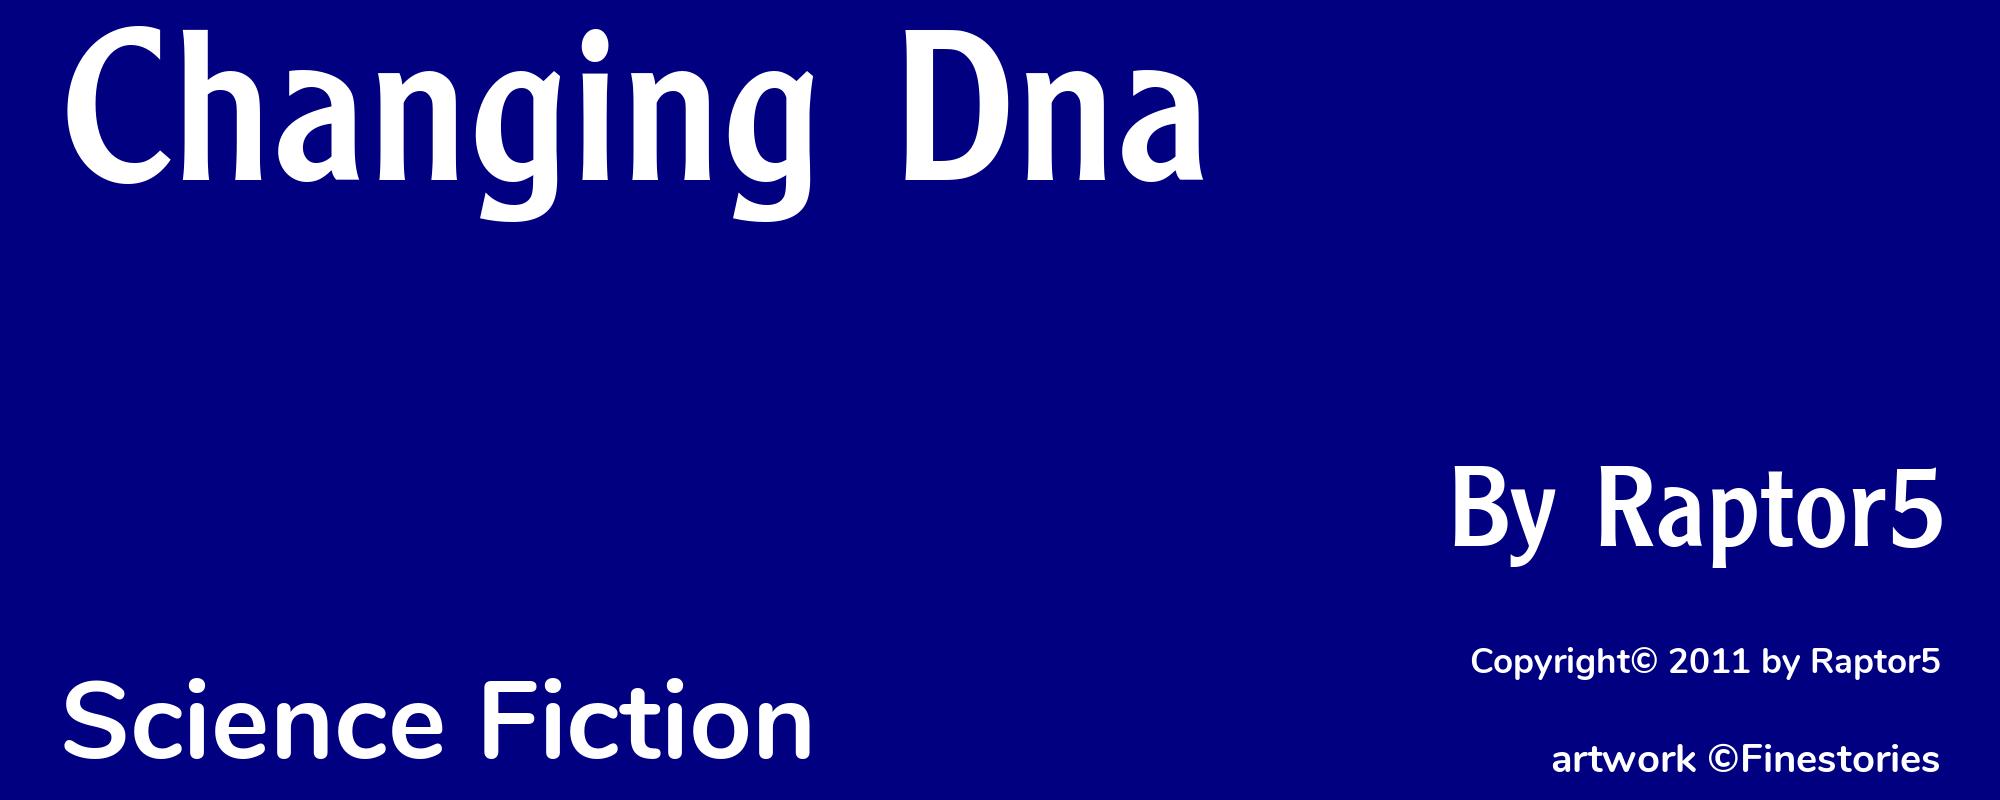 Changing Dna - Cover